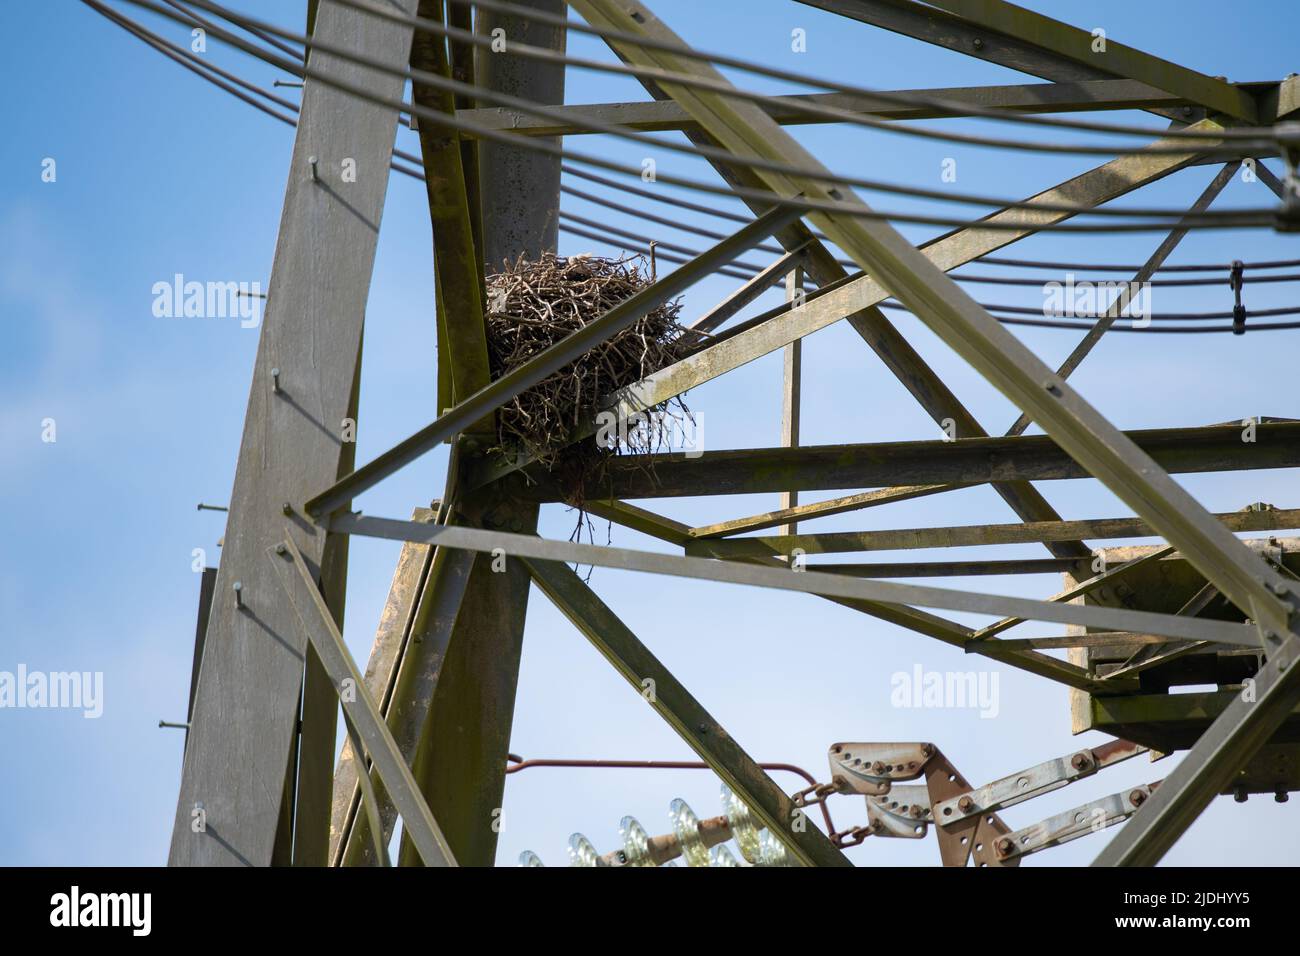 Large bird nest in a lattice electrical power tower in the New Forest Hampshire UK. Stock Photo